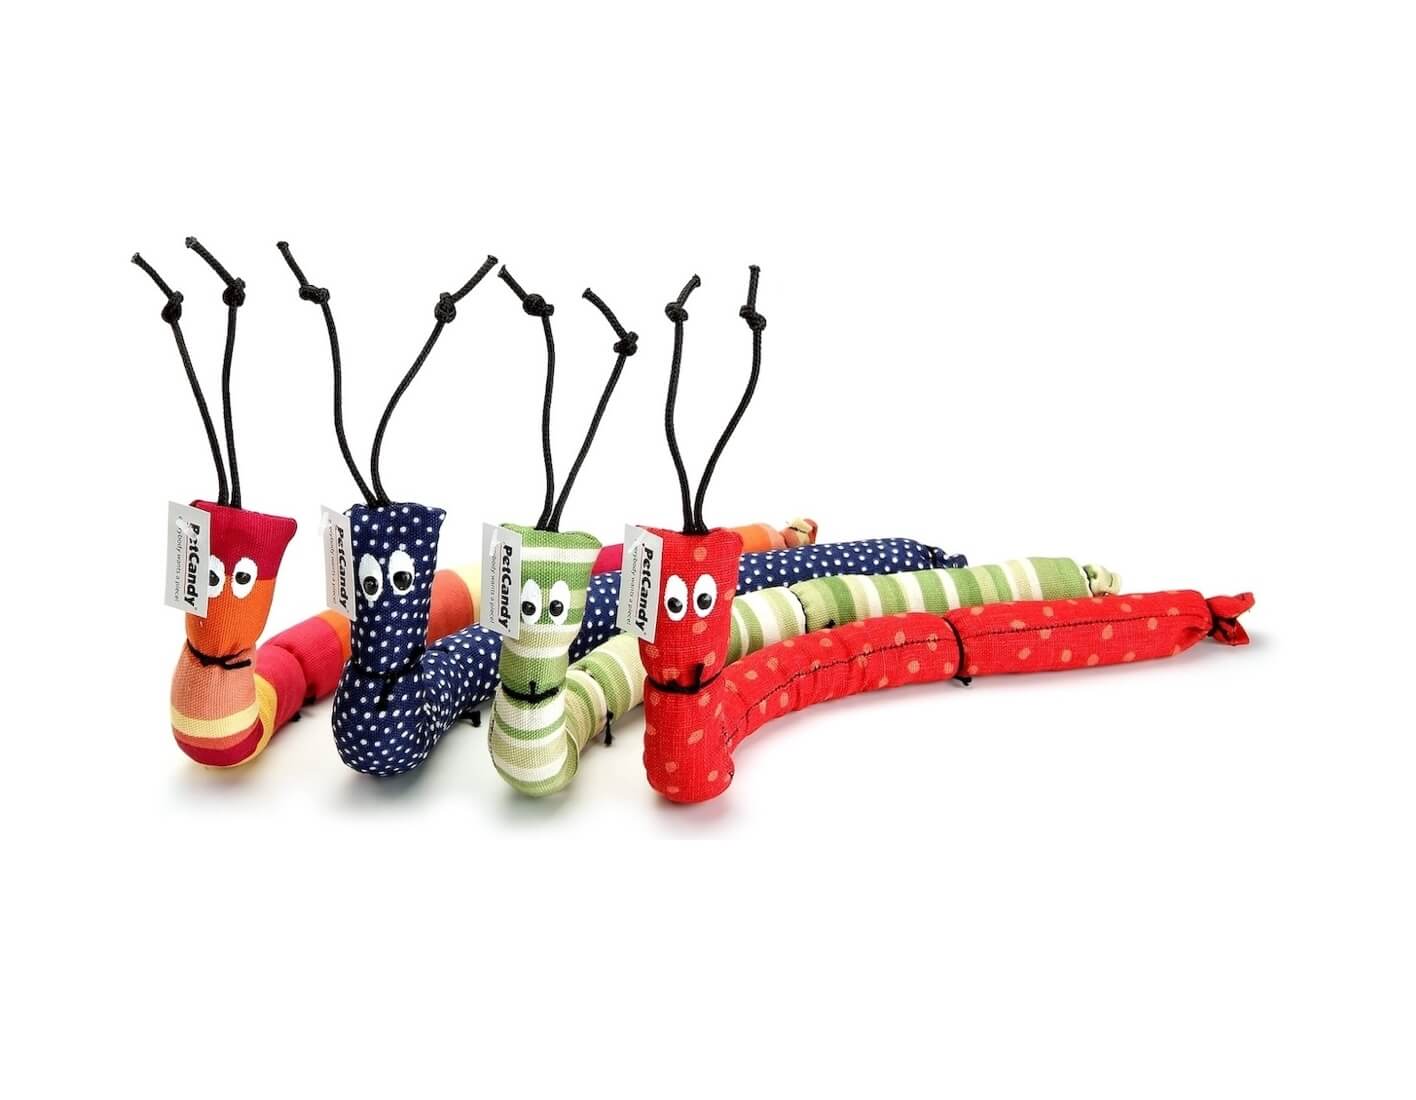 Handmade caterpillar kicker toys in various colors and patterns, stuffed with US grown, farm fresh catnip. Made in USA.